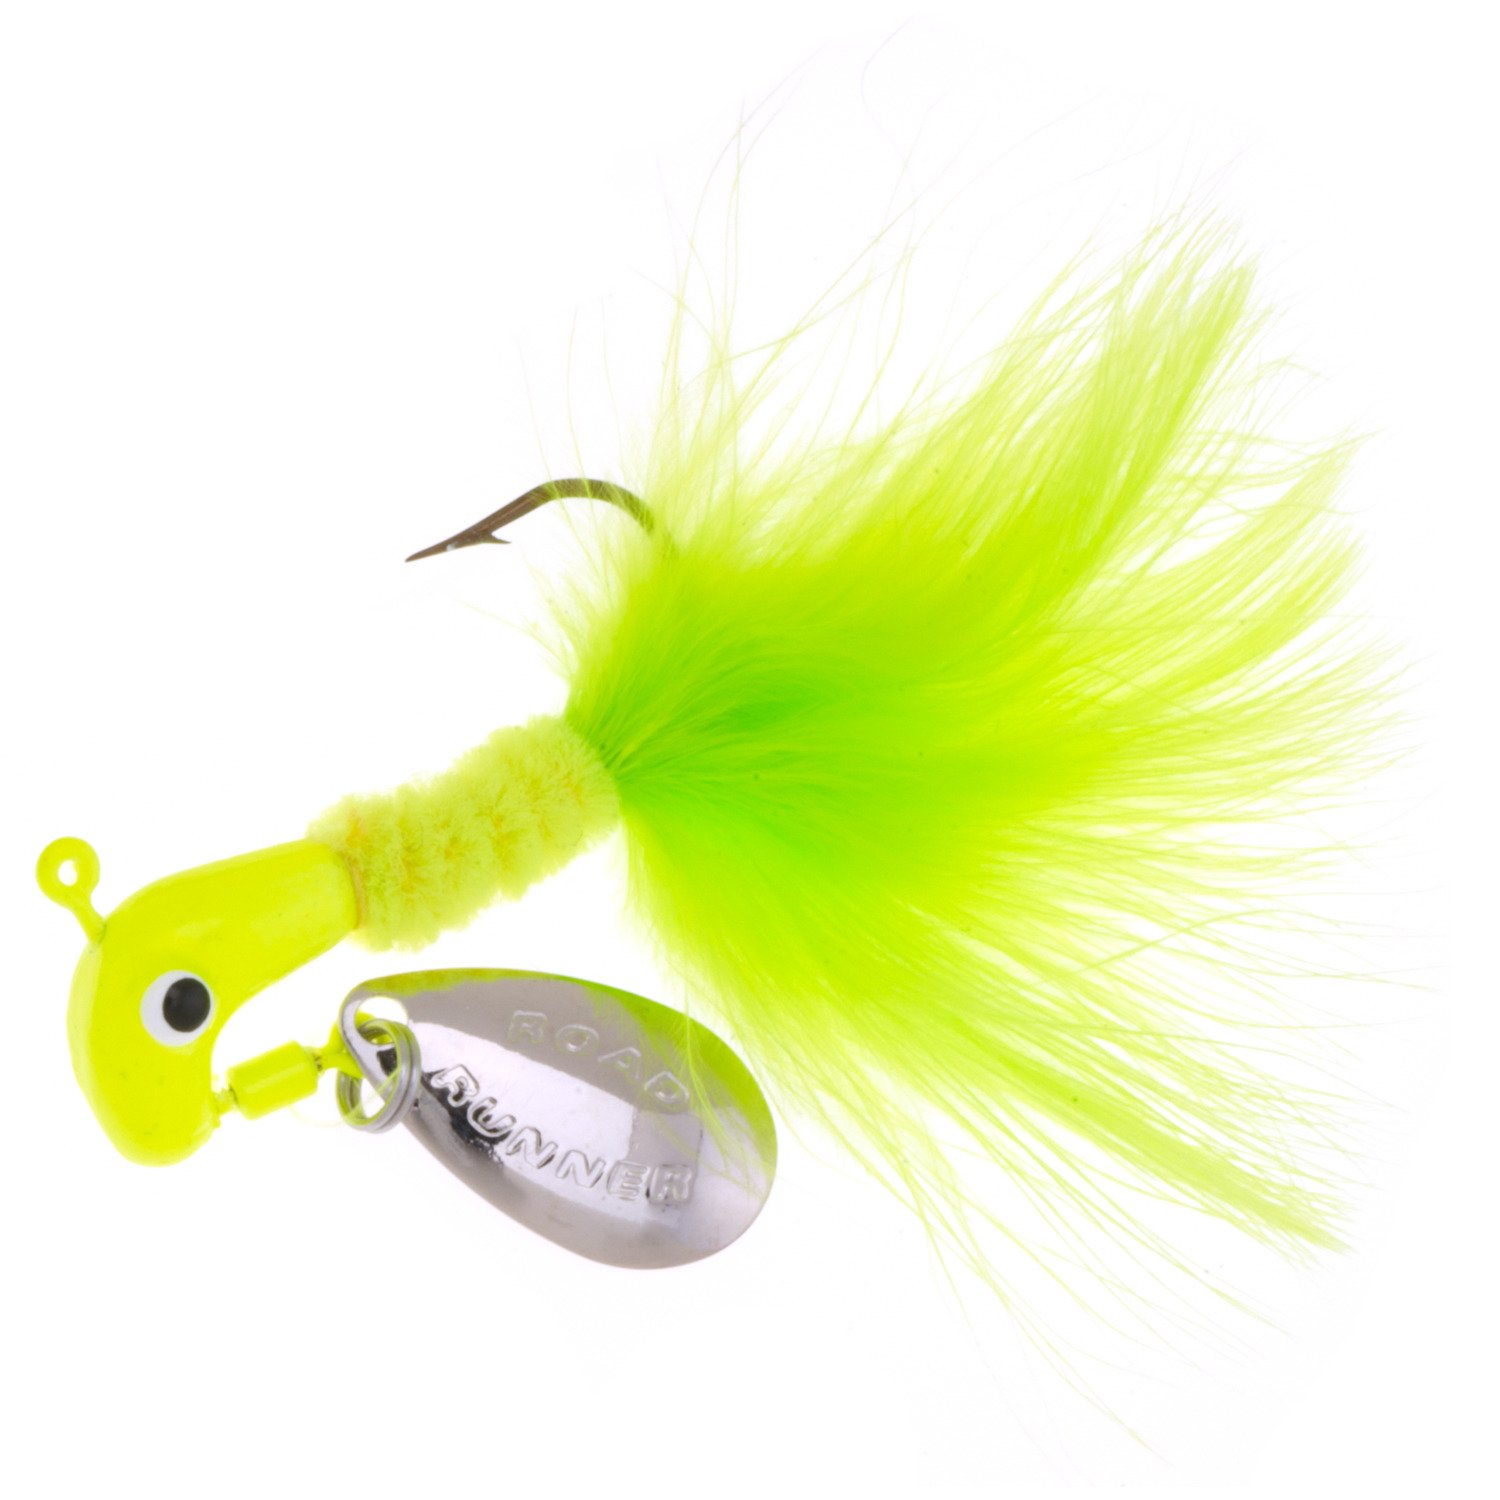 Academy Sports + Outdoors Blakemore Road Runner Crappie Thunder 1